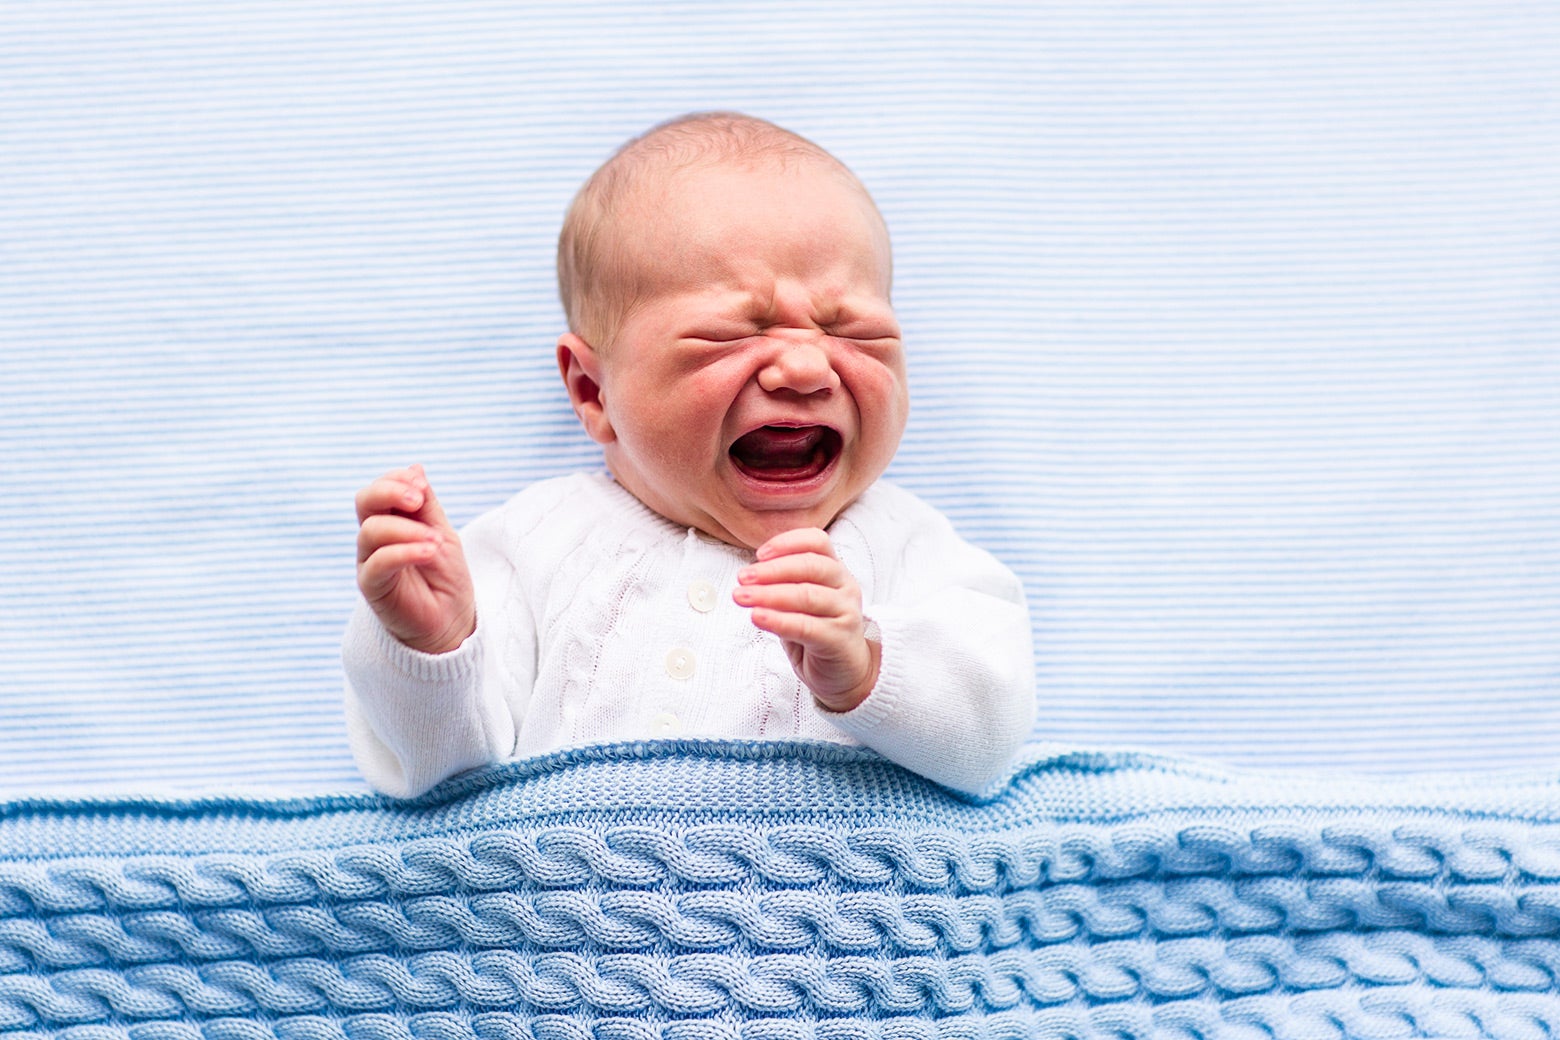 Every Word We Have to Describe a Crying Newborn Is Wrong